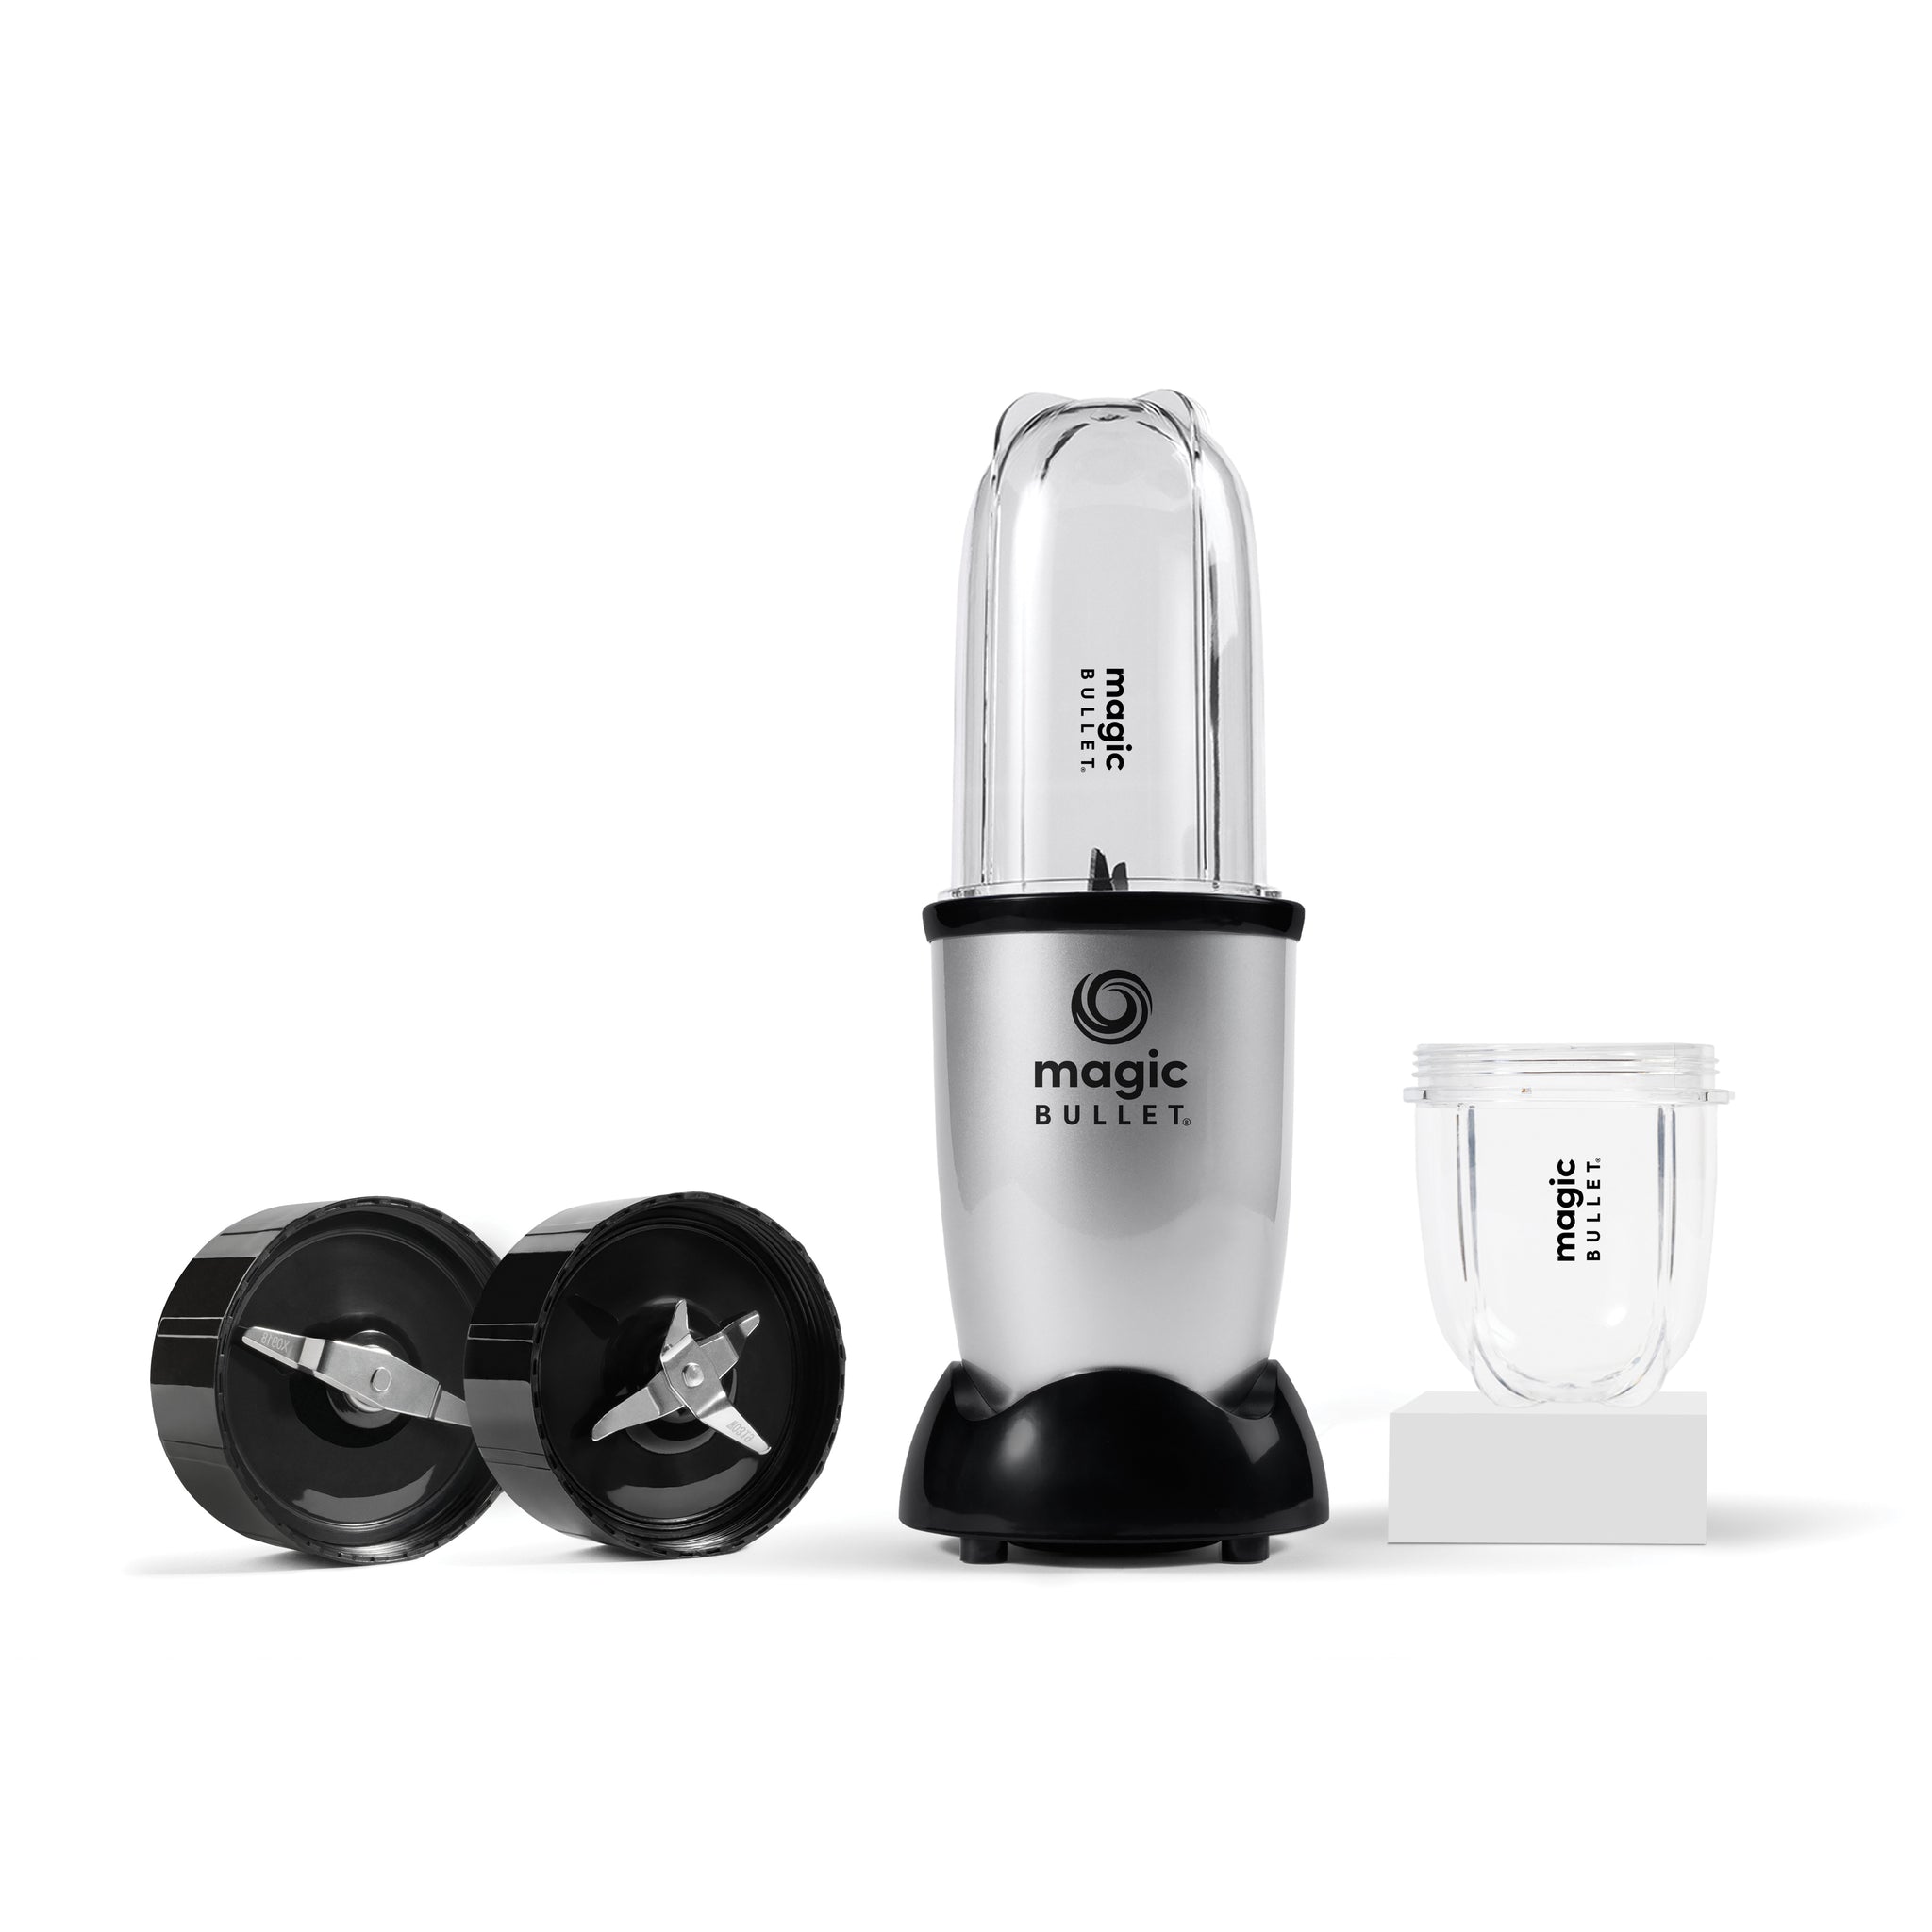 Magic bullet and accessories - household items - by owner